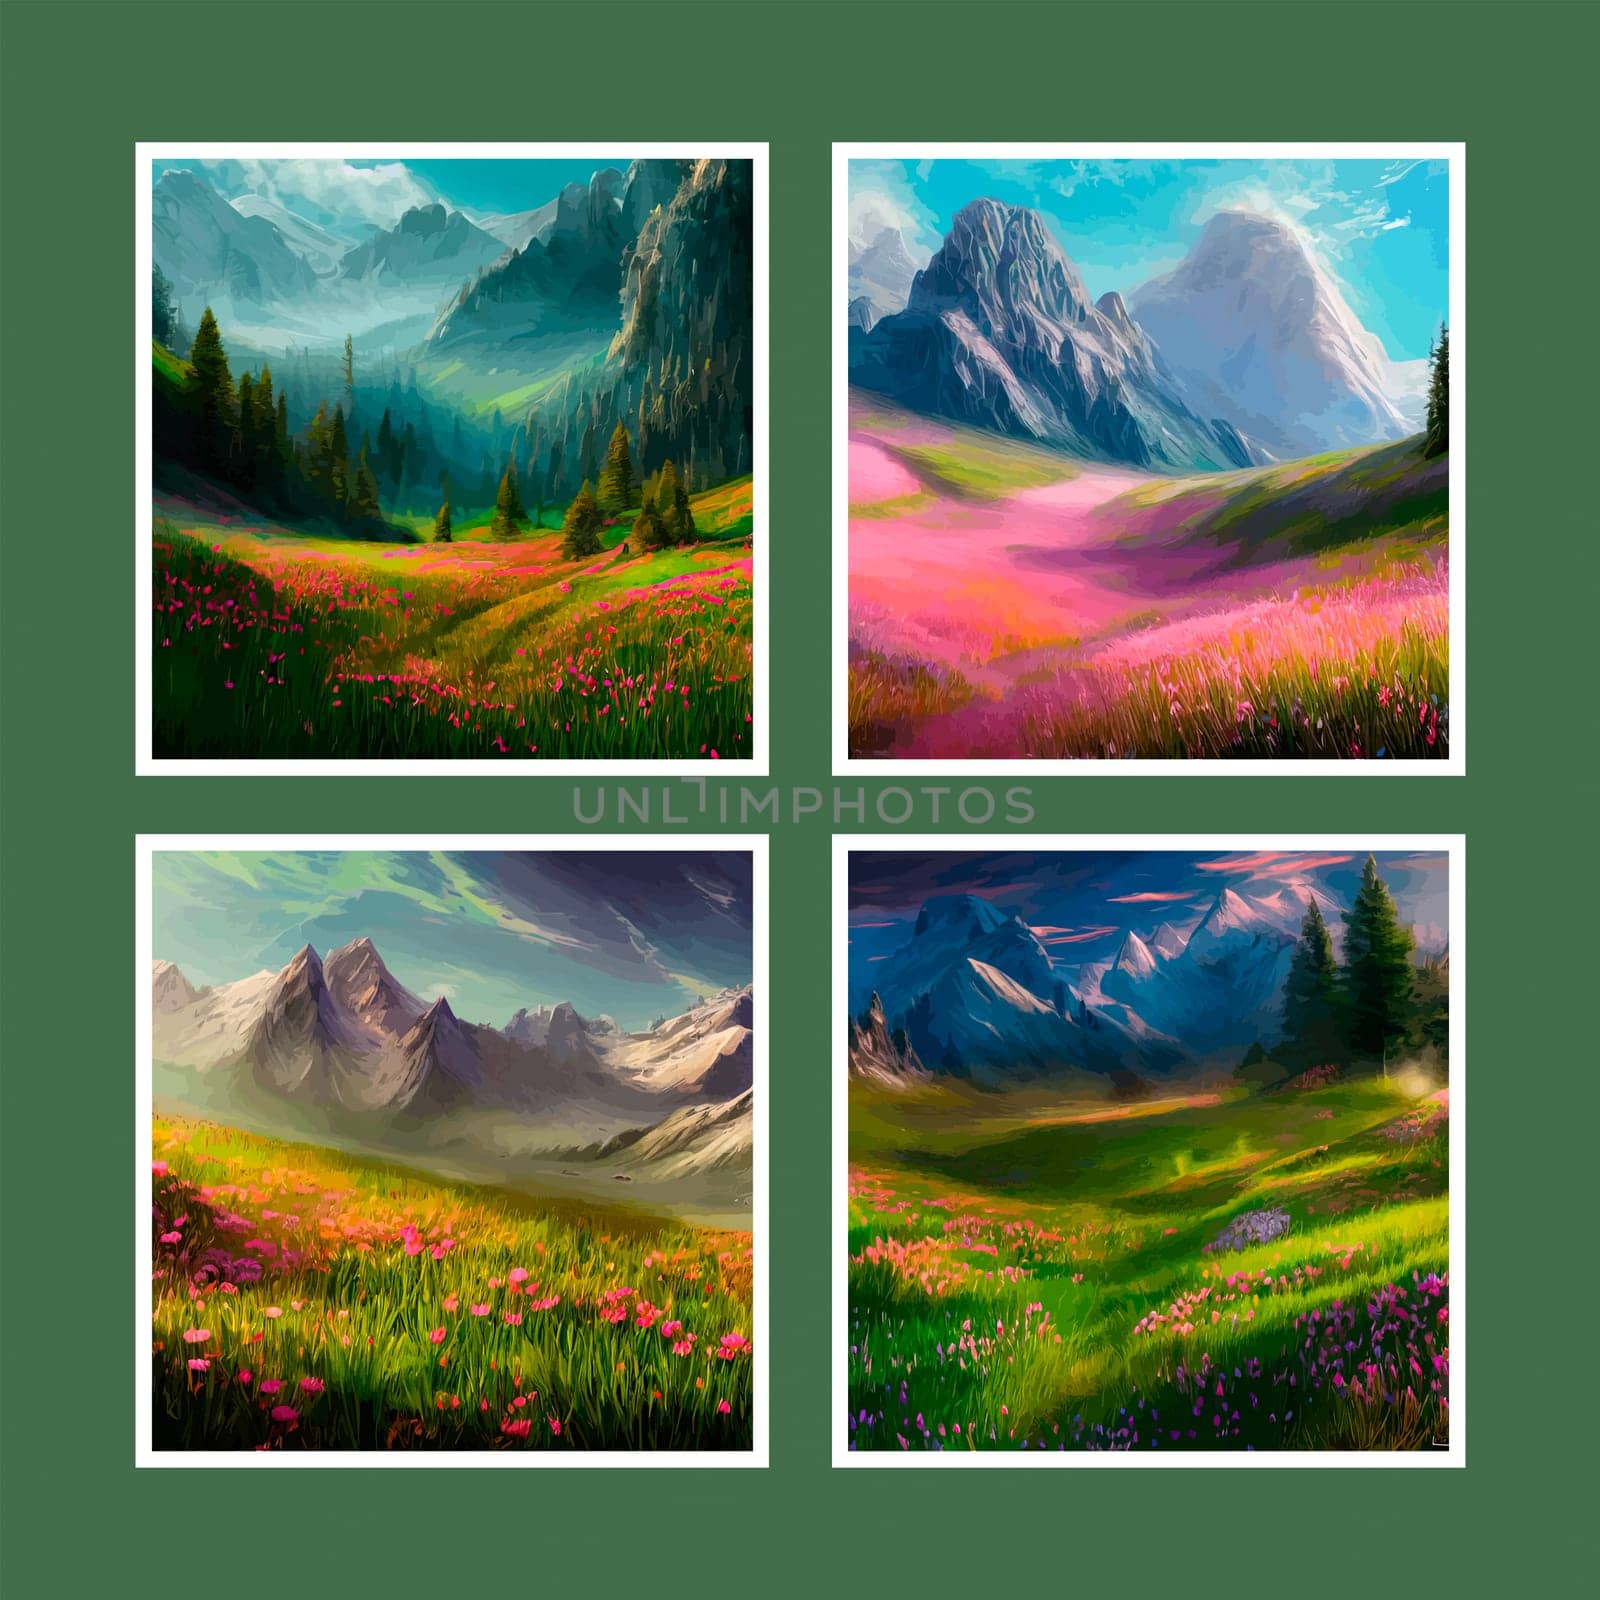 Spring landscape in village with green field and sunset set of four posters, flat cartoon countryside with mountain and forest, blue sky, natural countryside scene, sunny day summer